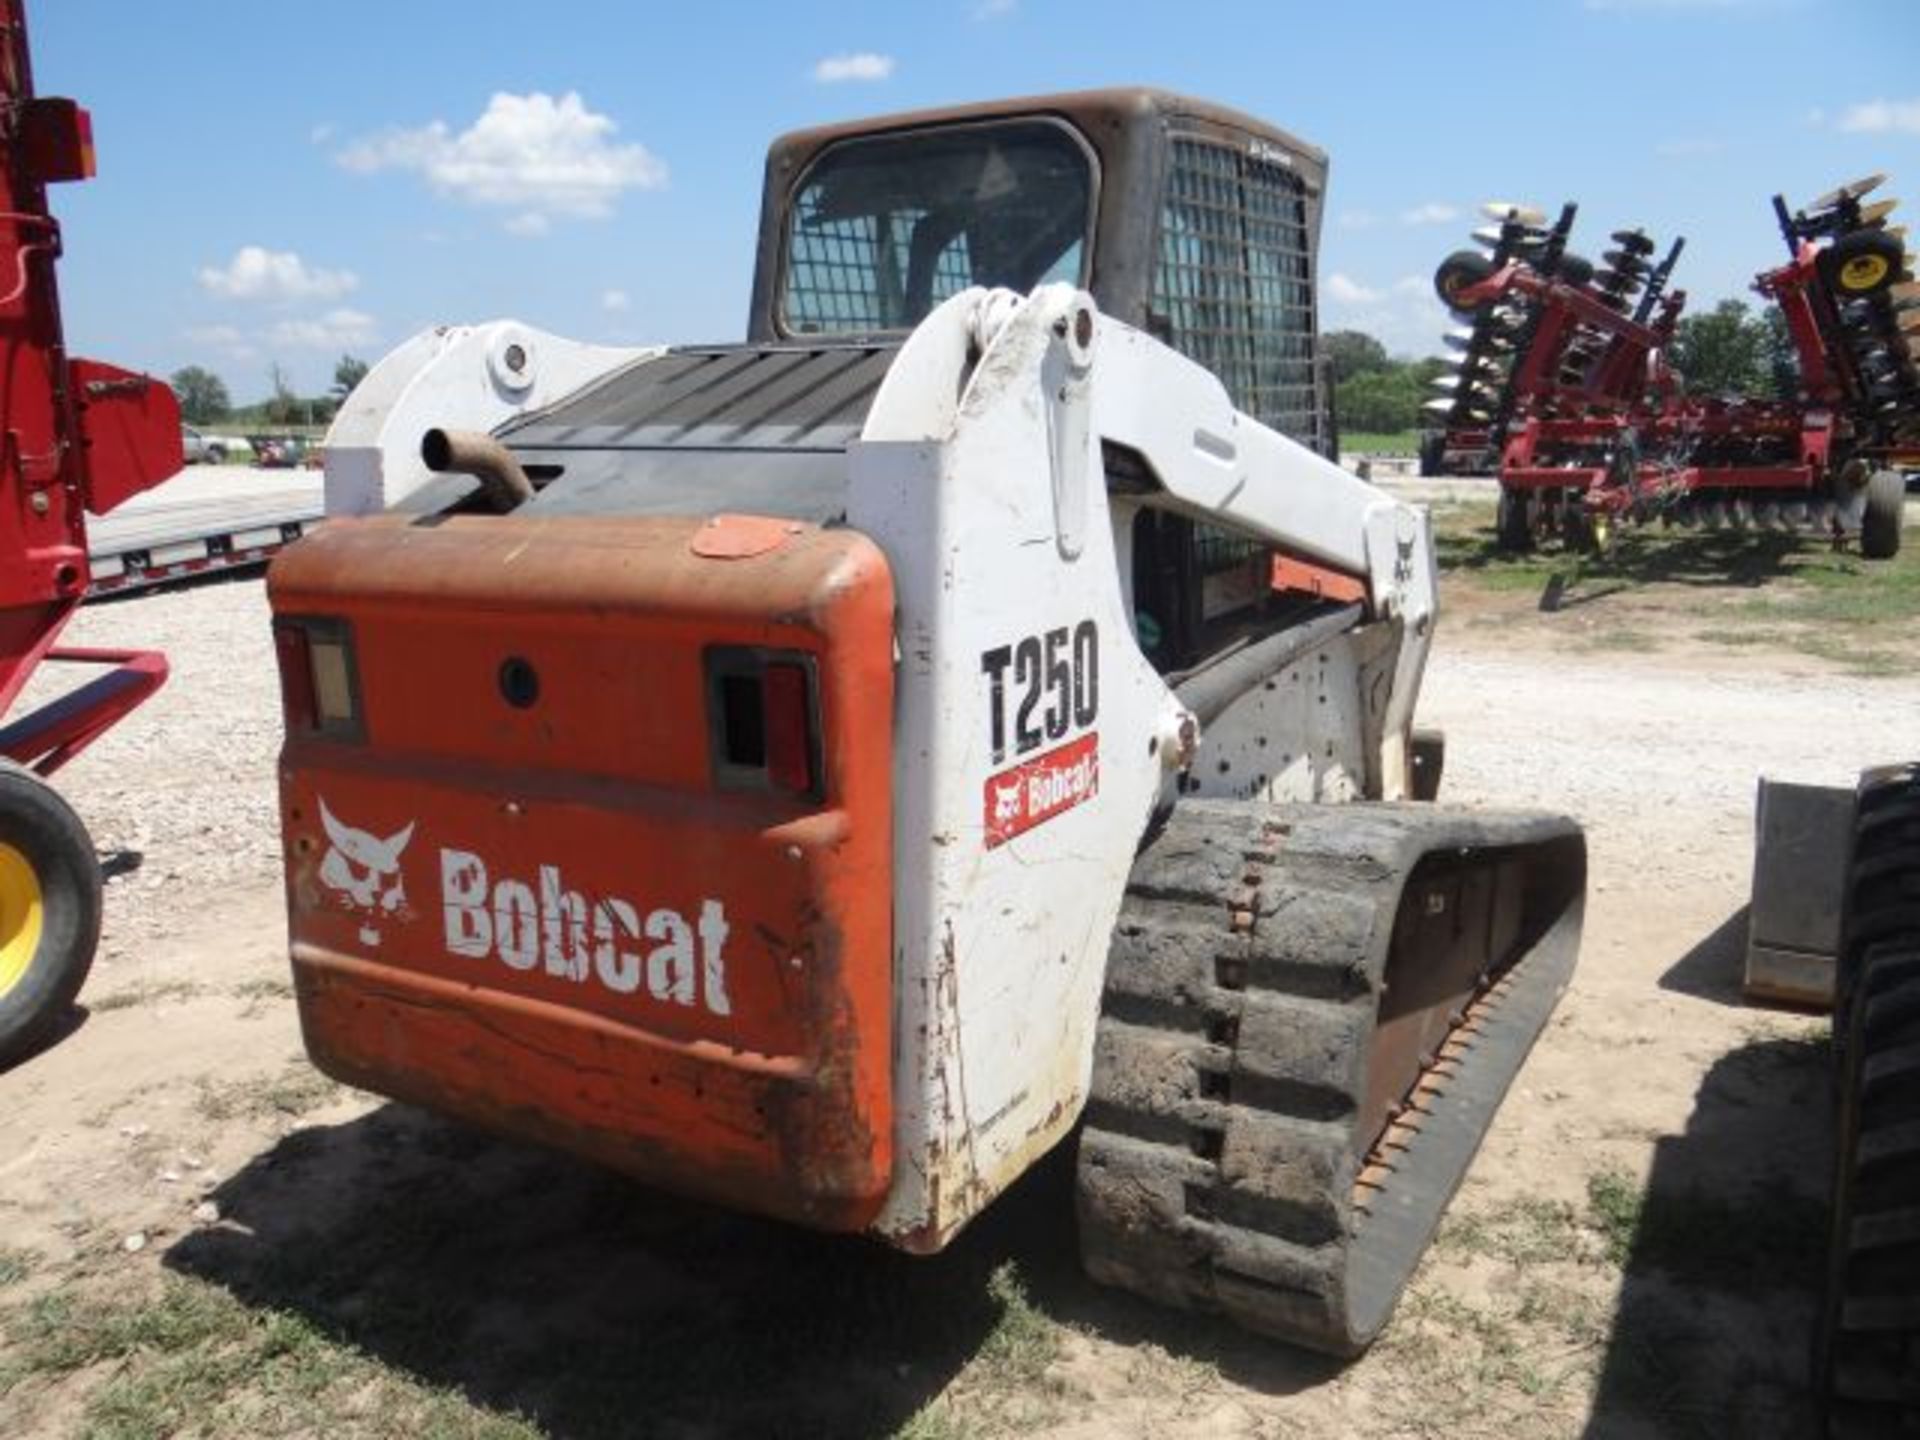 BobCat T250 Skid Steer, 2006 #112062, 4717 hrs, Switchable ISO and H Pattern Controls, CAH, 84" - Image 3 of 4